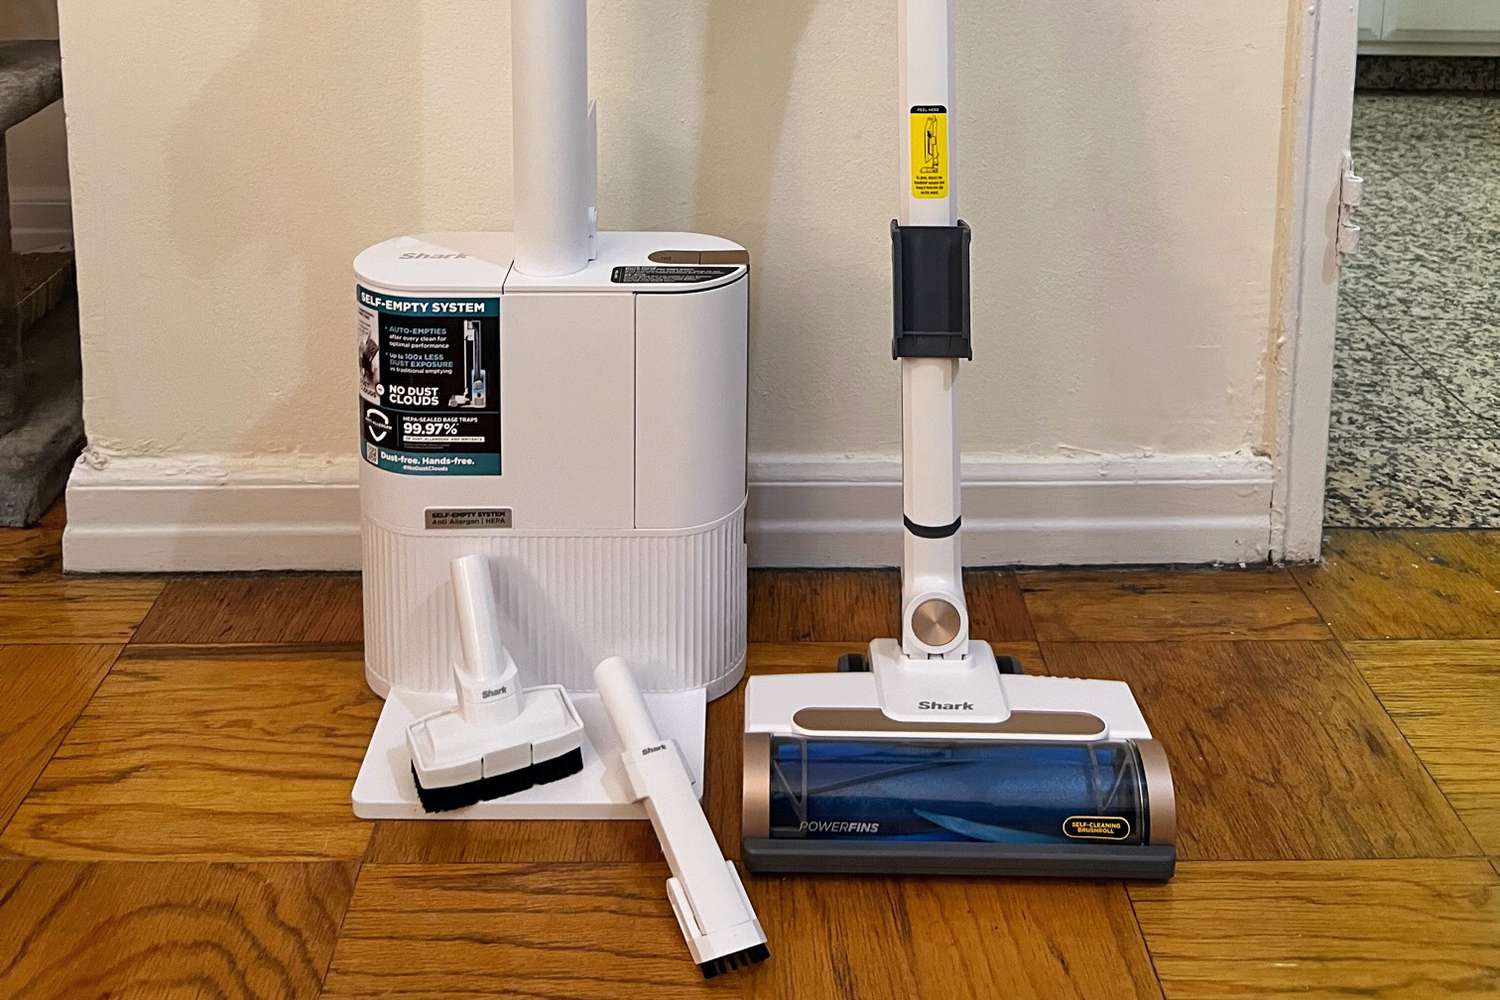 Shark Wandvac Cordless Stick Vacuum with Self-Empty Charging Base and attachments on a wood floor.